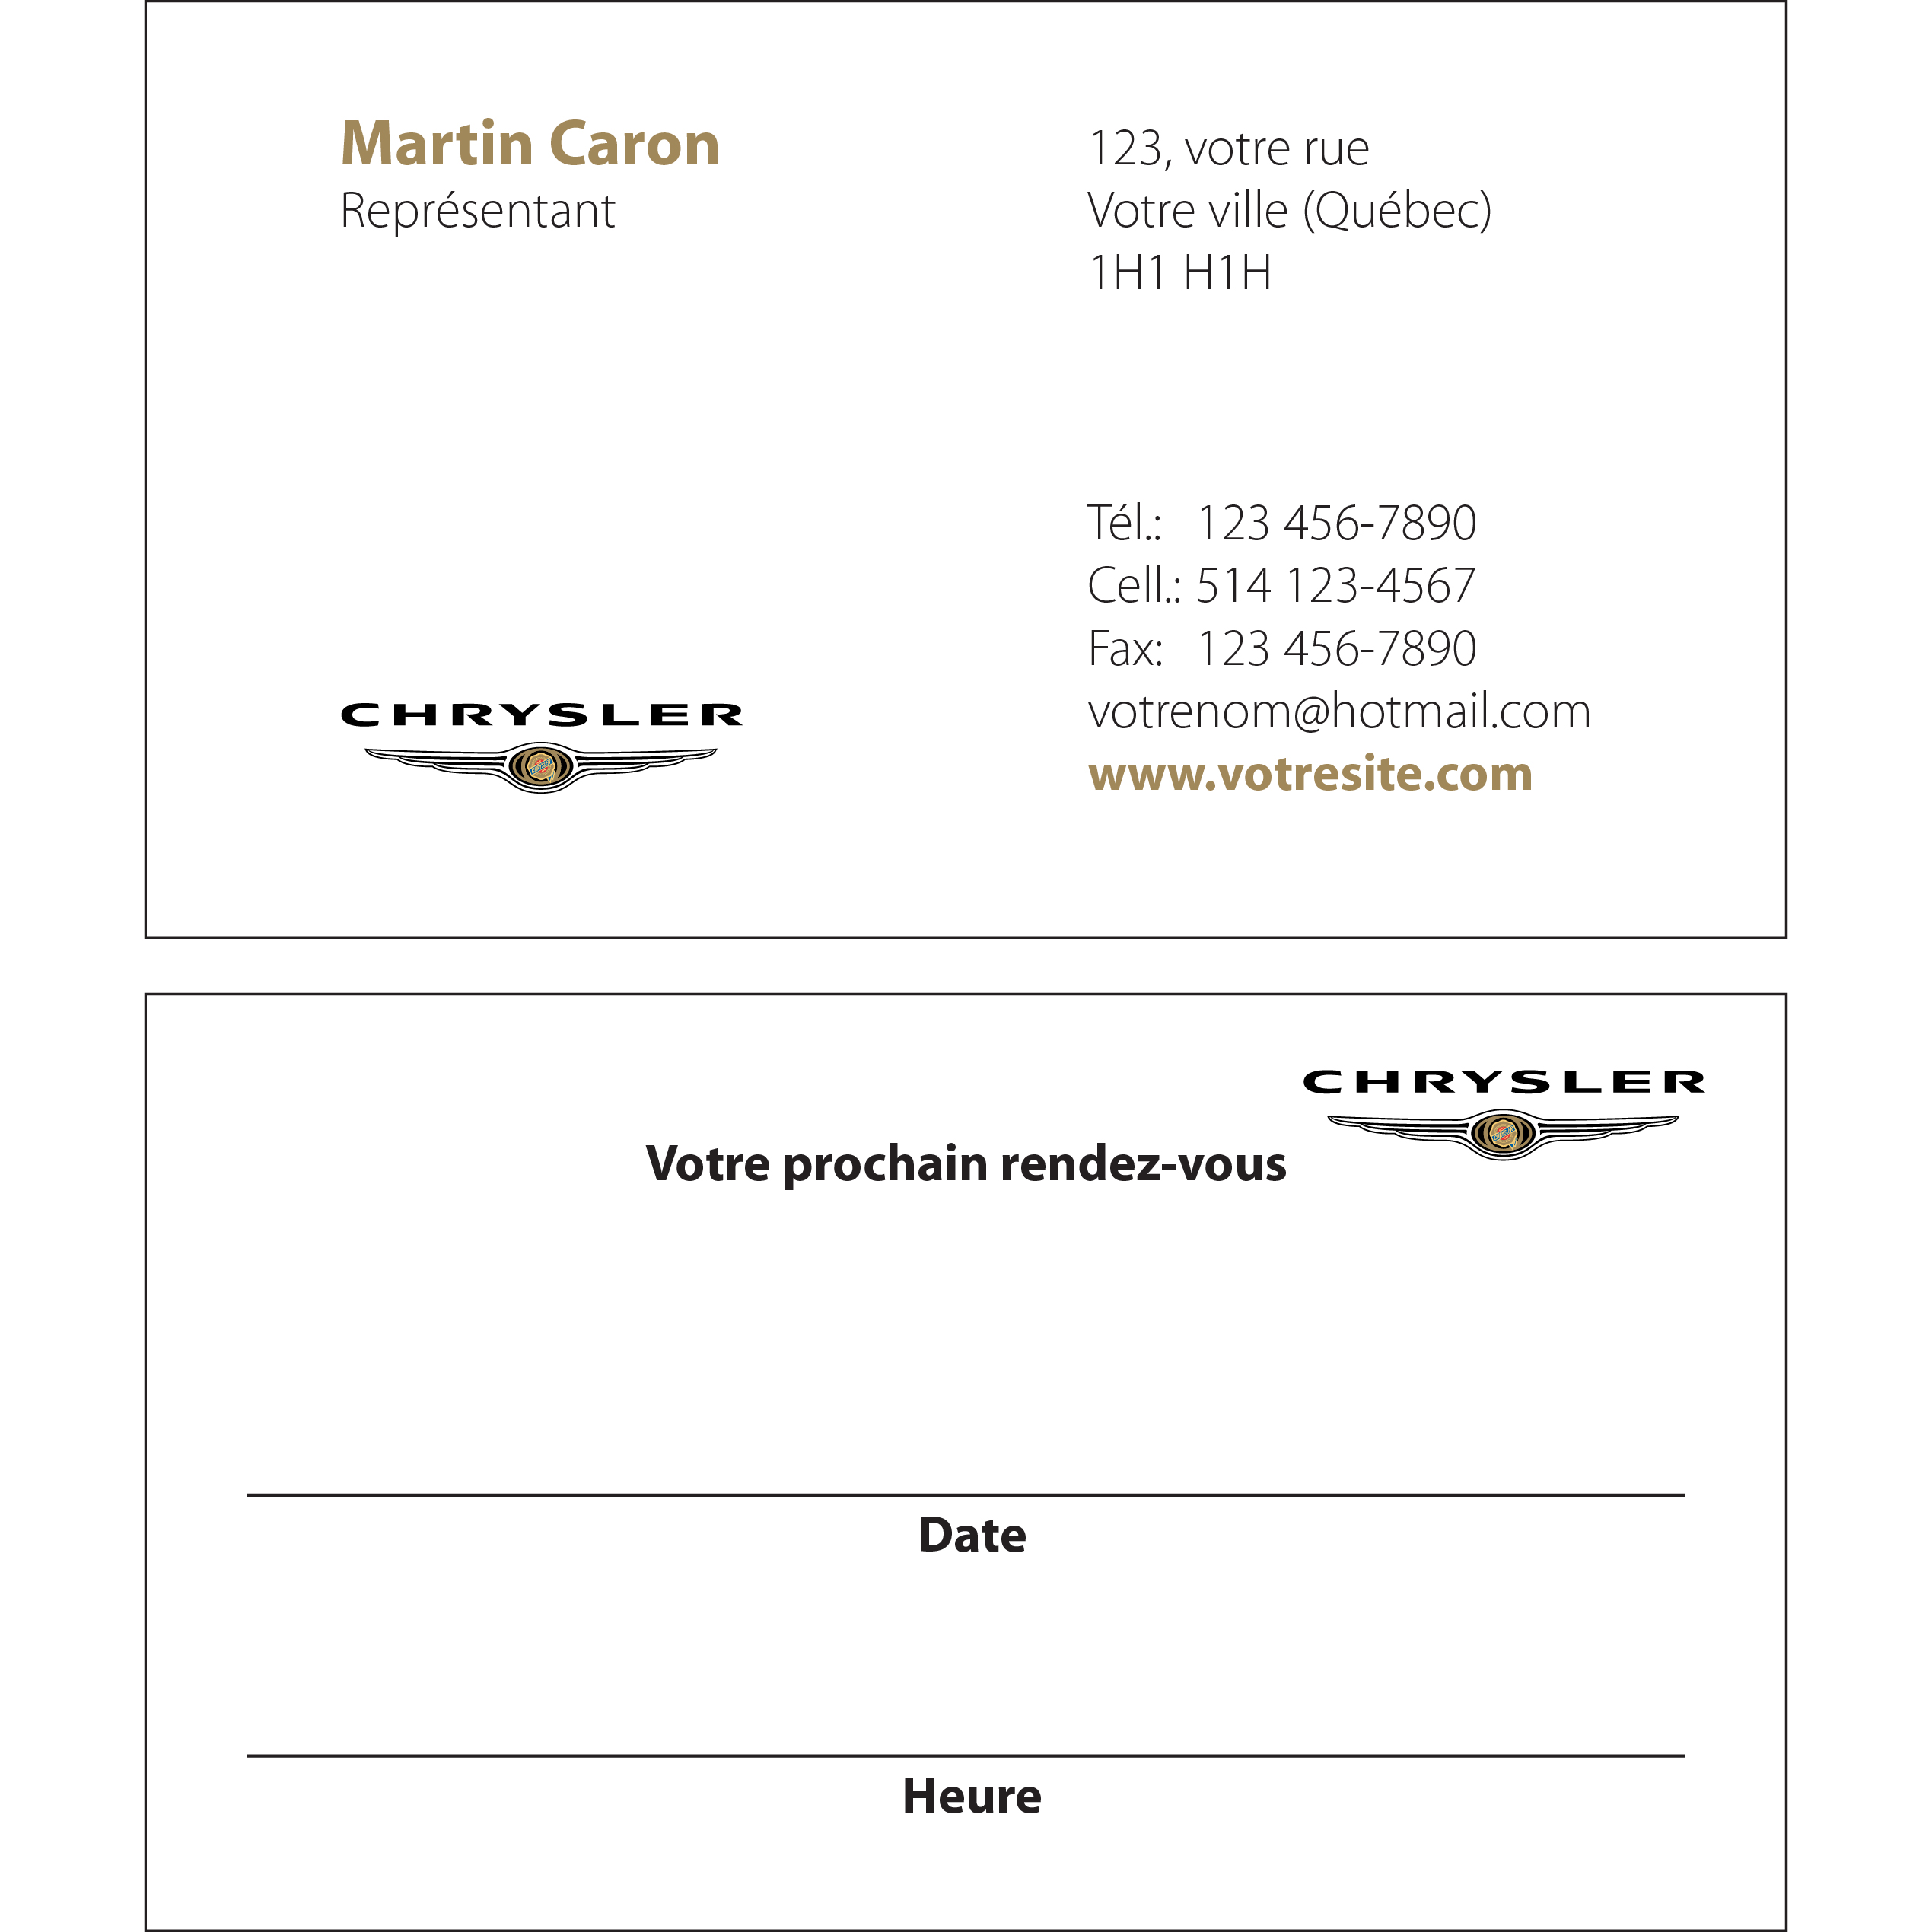 Chrysler Business cards - 2 sides, BCCY04